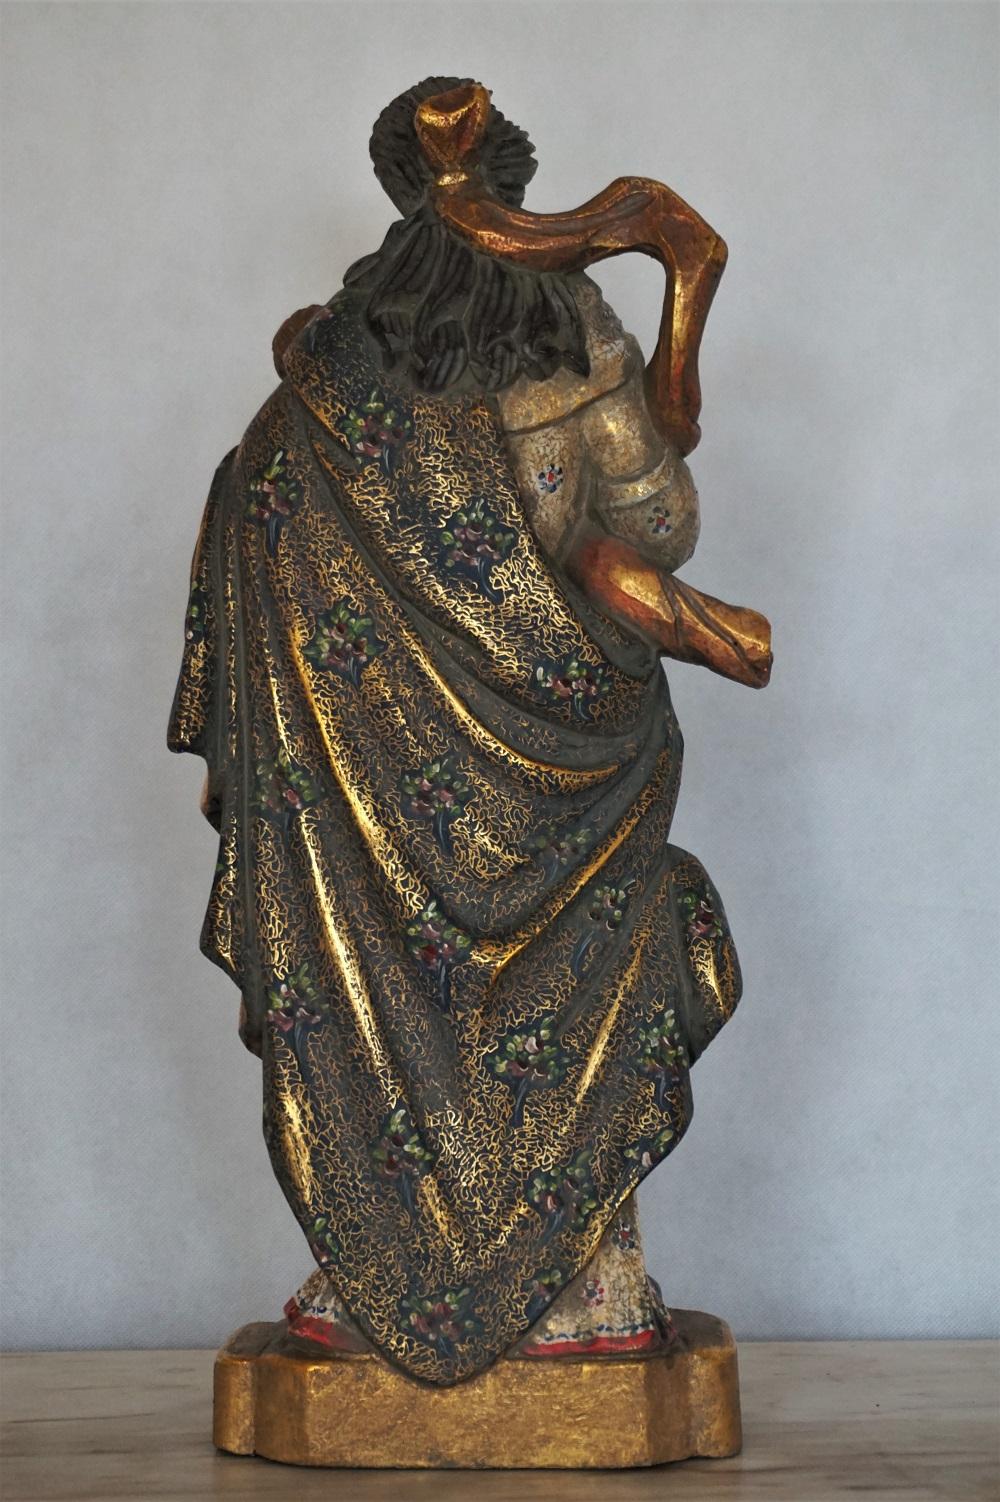 Madonna Carved Wood Sculpture Gold Leaf and Polychrome, Spain, Mid-18th Century For Sale 7